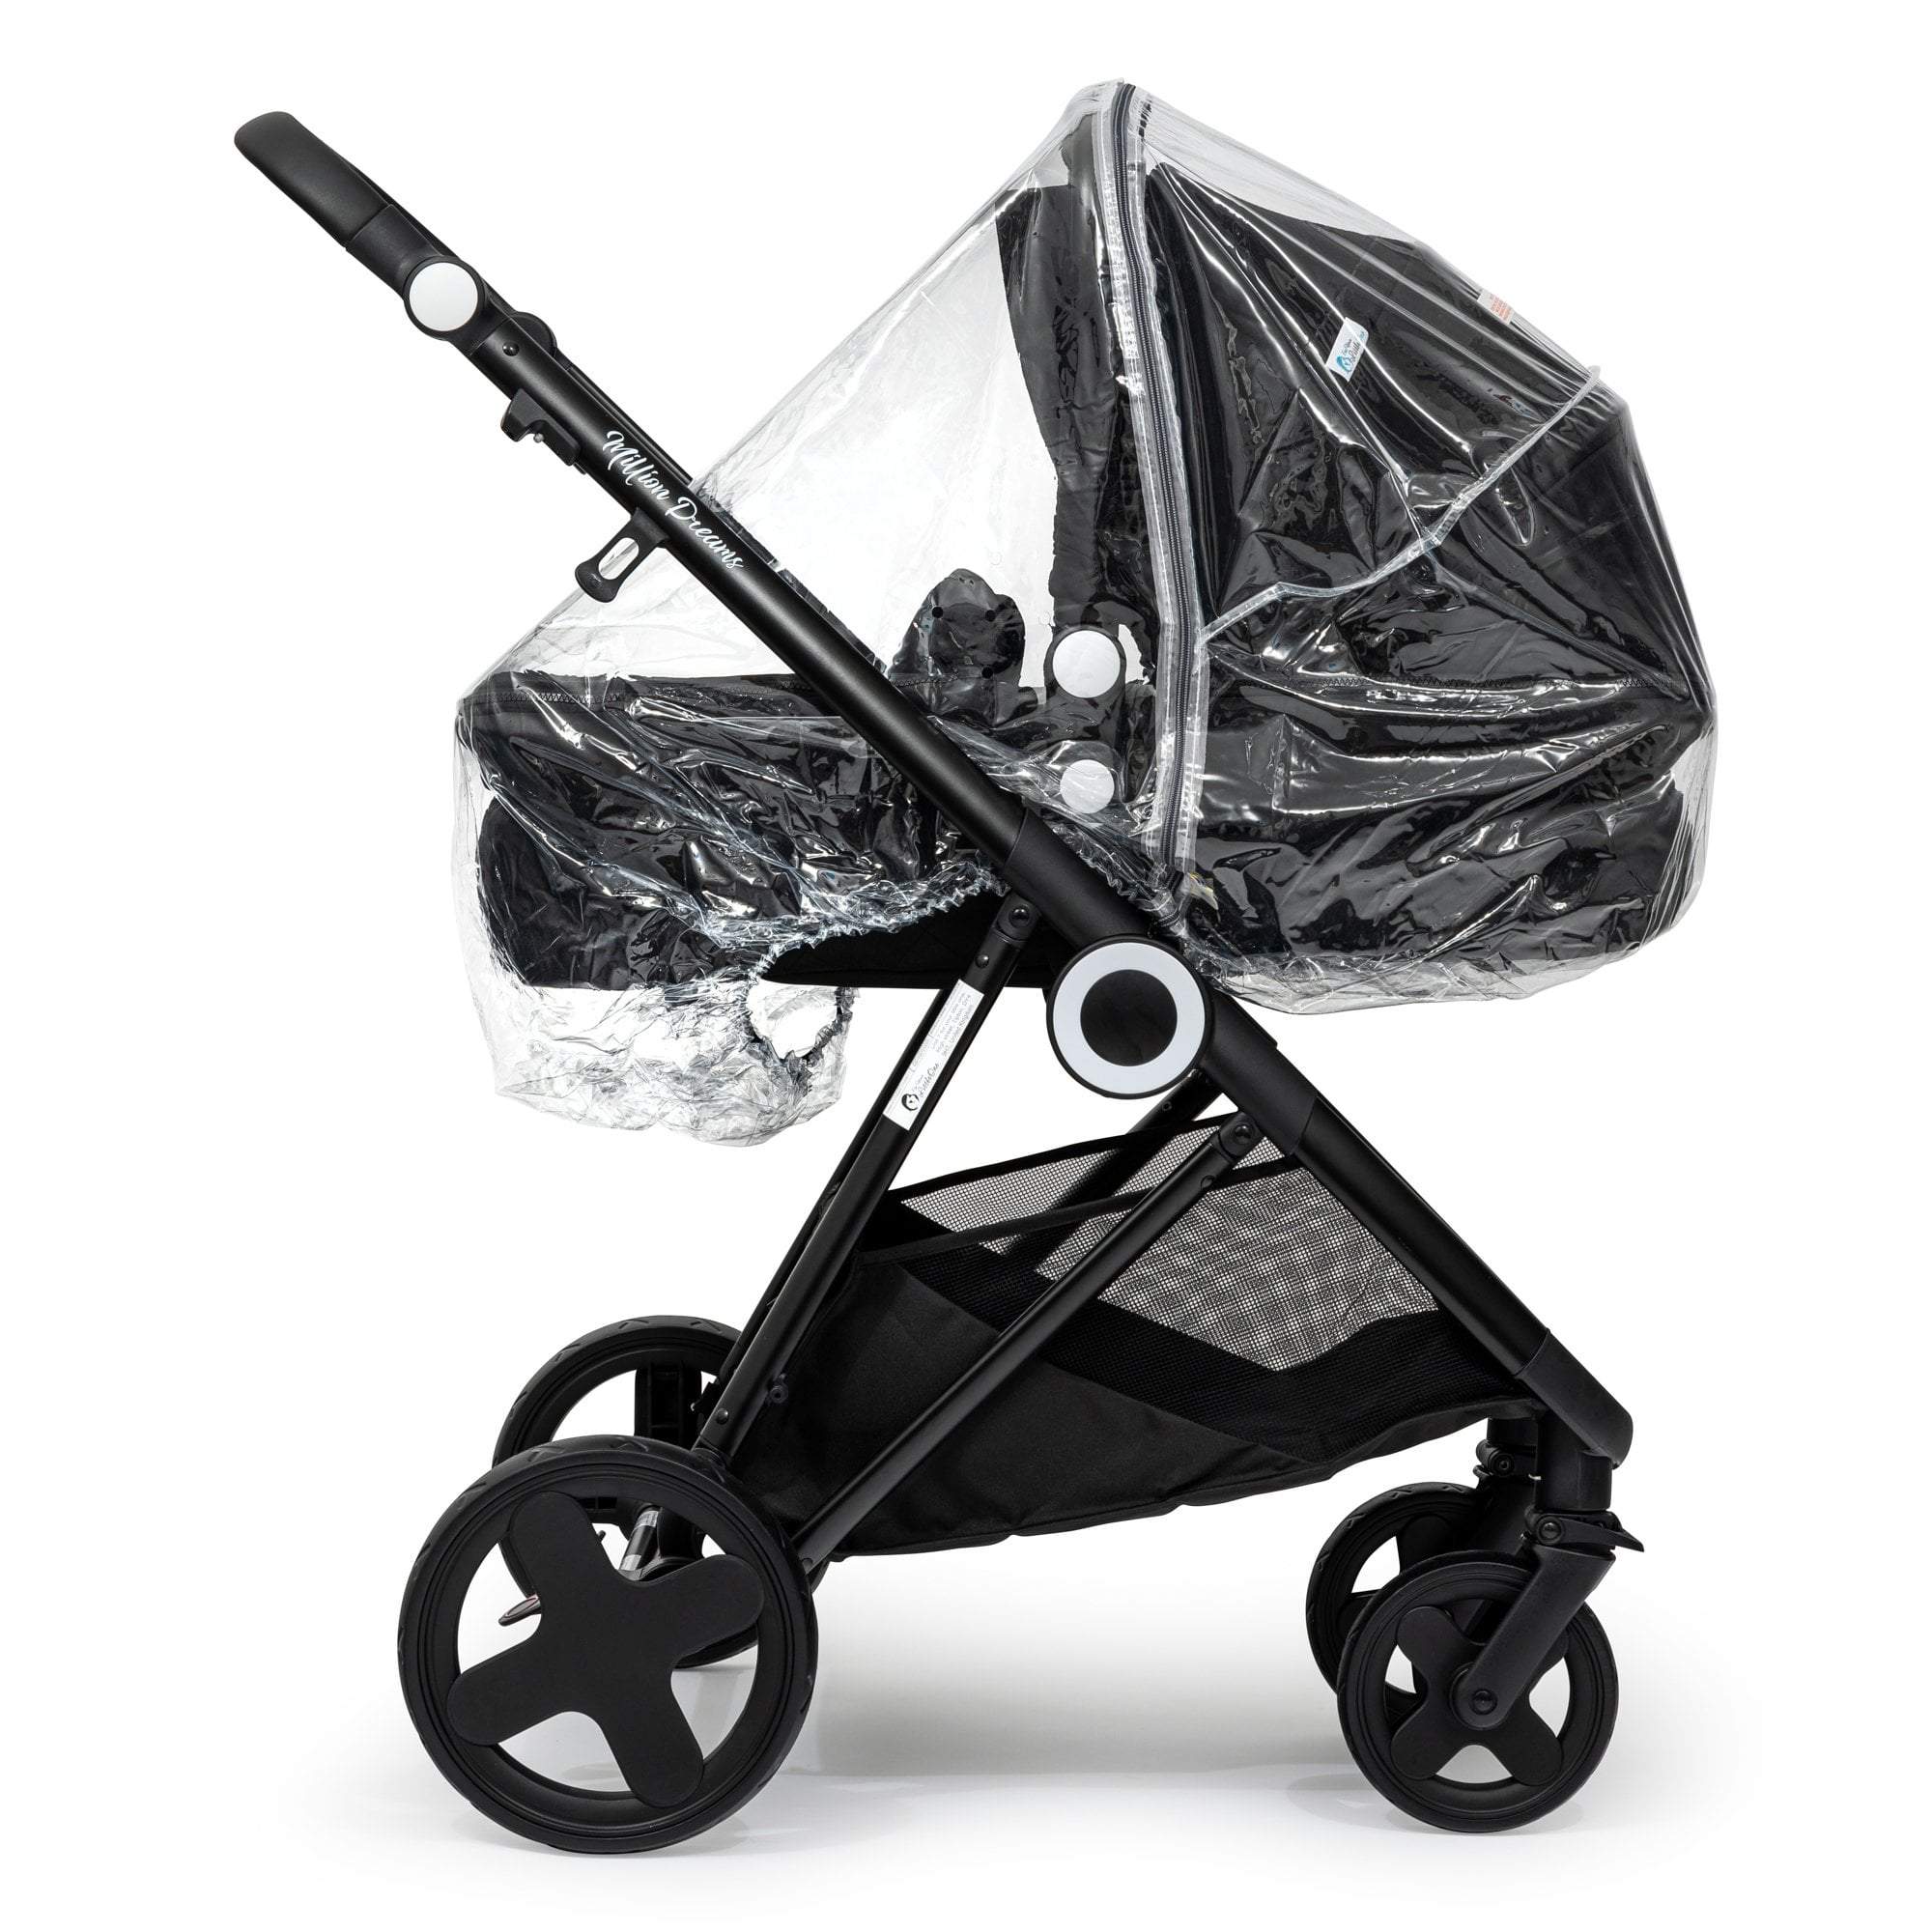 Carrycot Raincover Compatible With BabiesRus - Fits All Models - For Your Little One